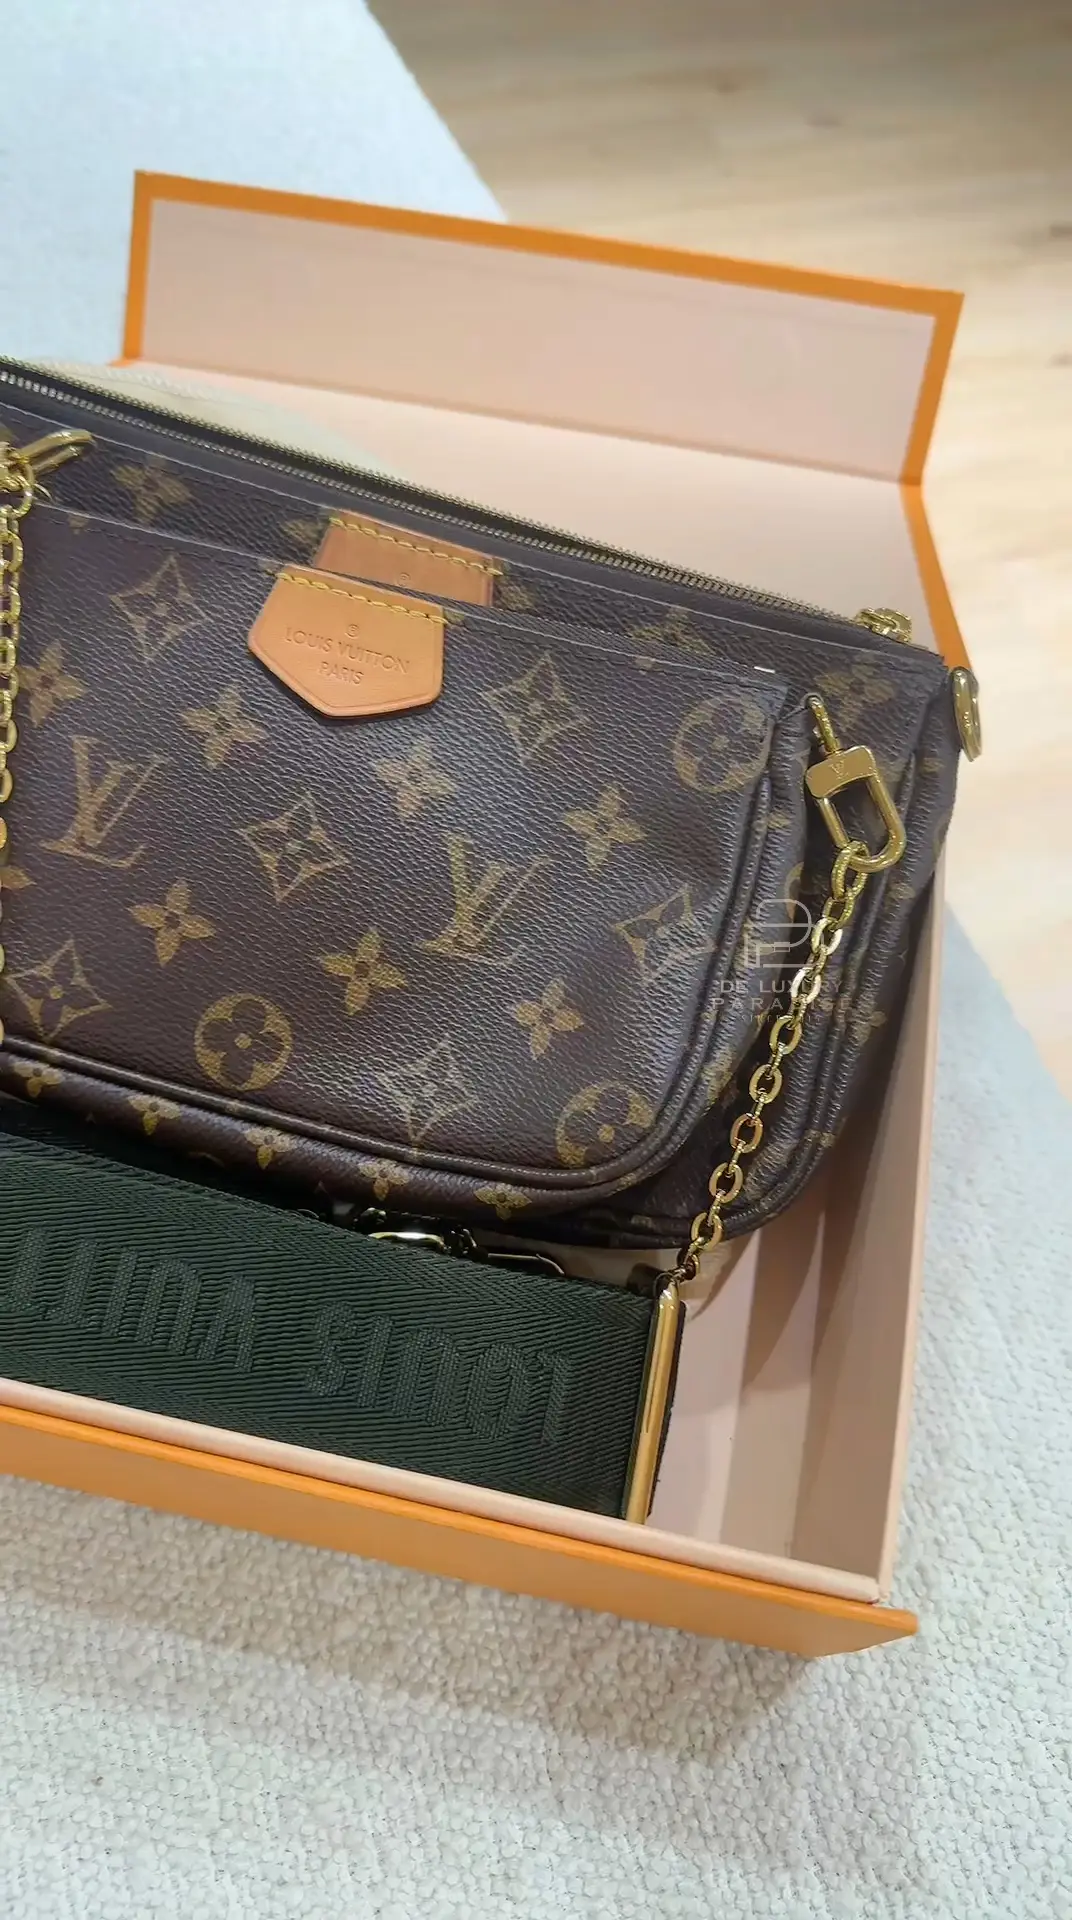 IS IT STILL WORTH IT? - LOUIS VUITTON MULTI-POCHETTE ACCESSOIRES - AFTER  THE HYPE HAS DIED! 